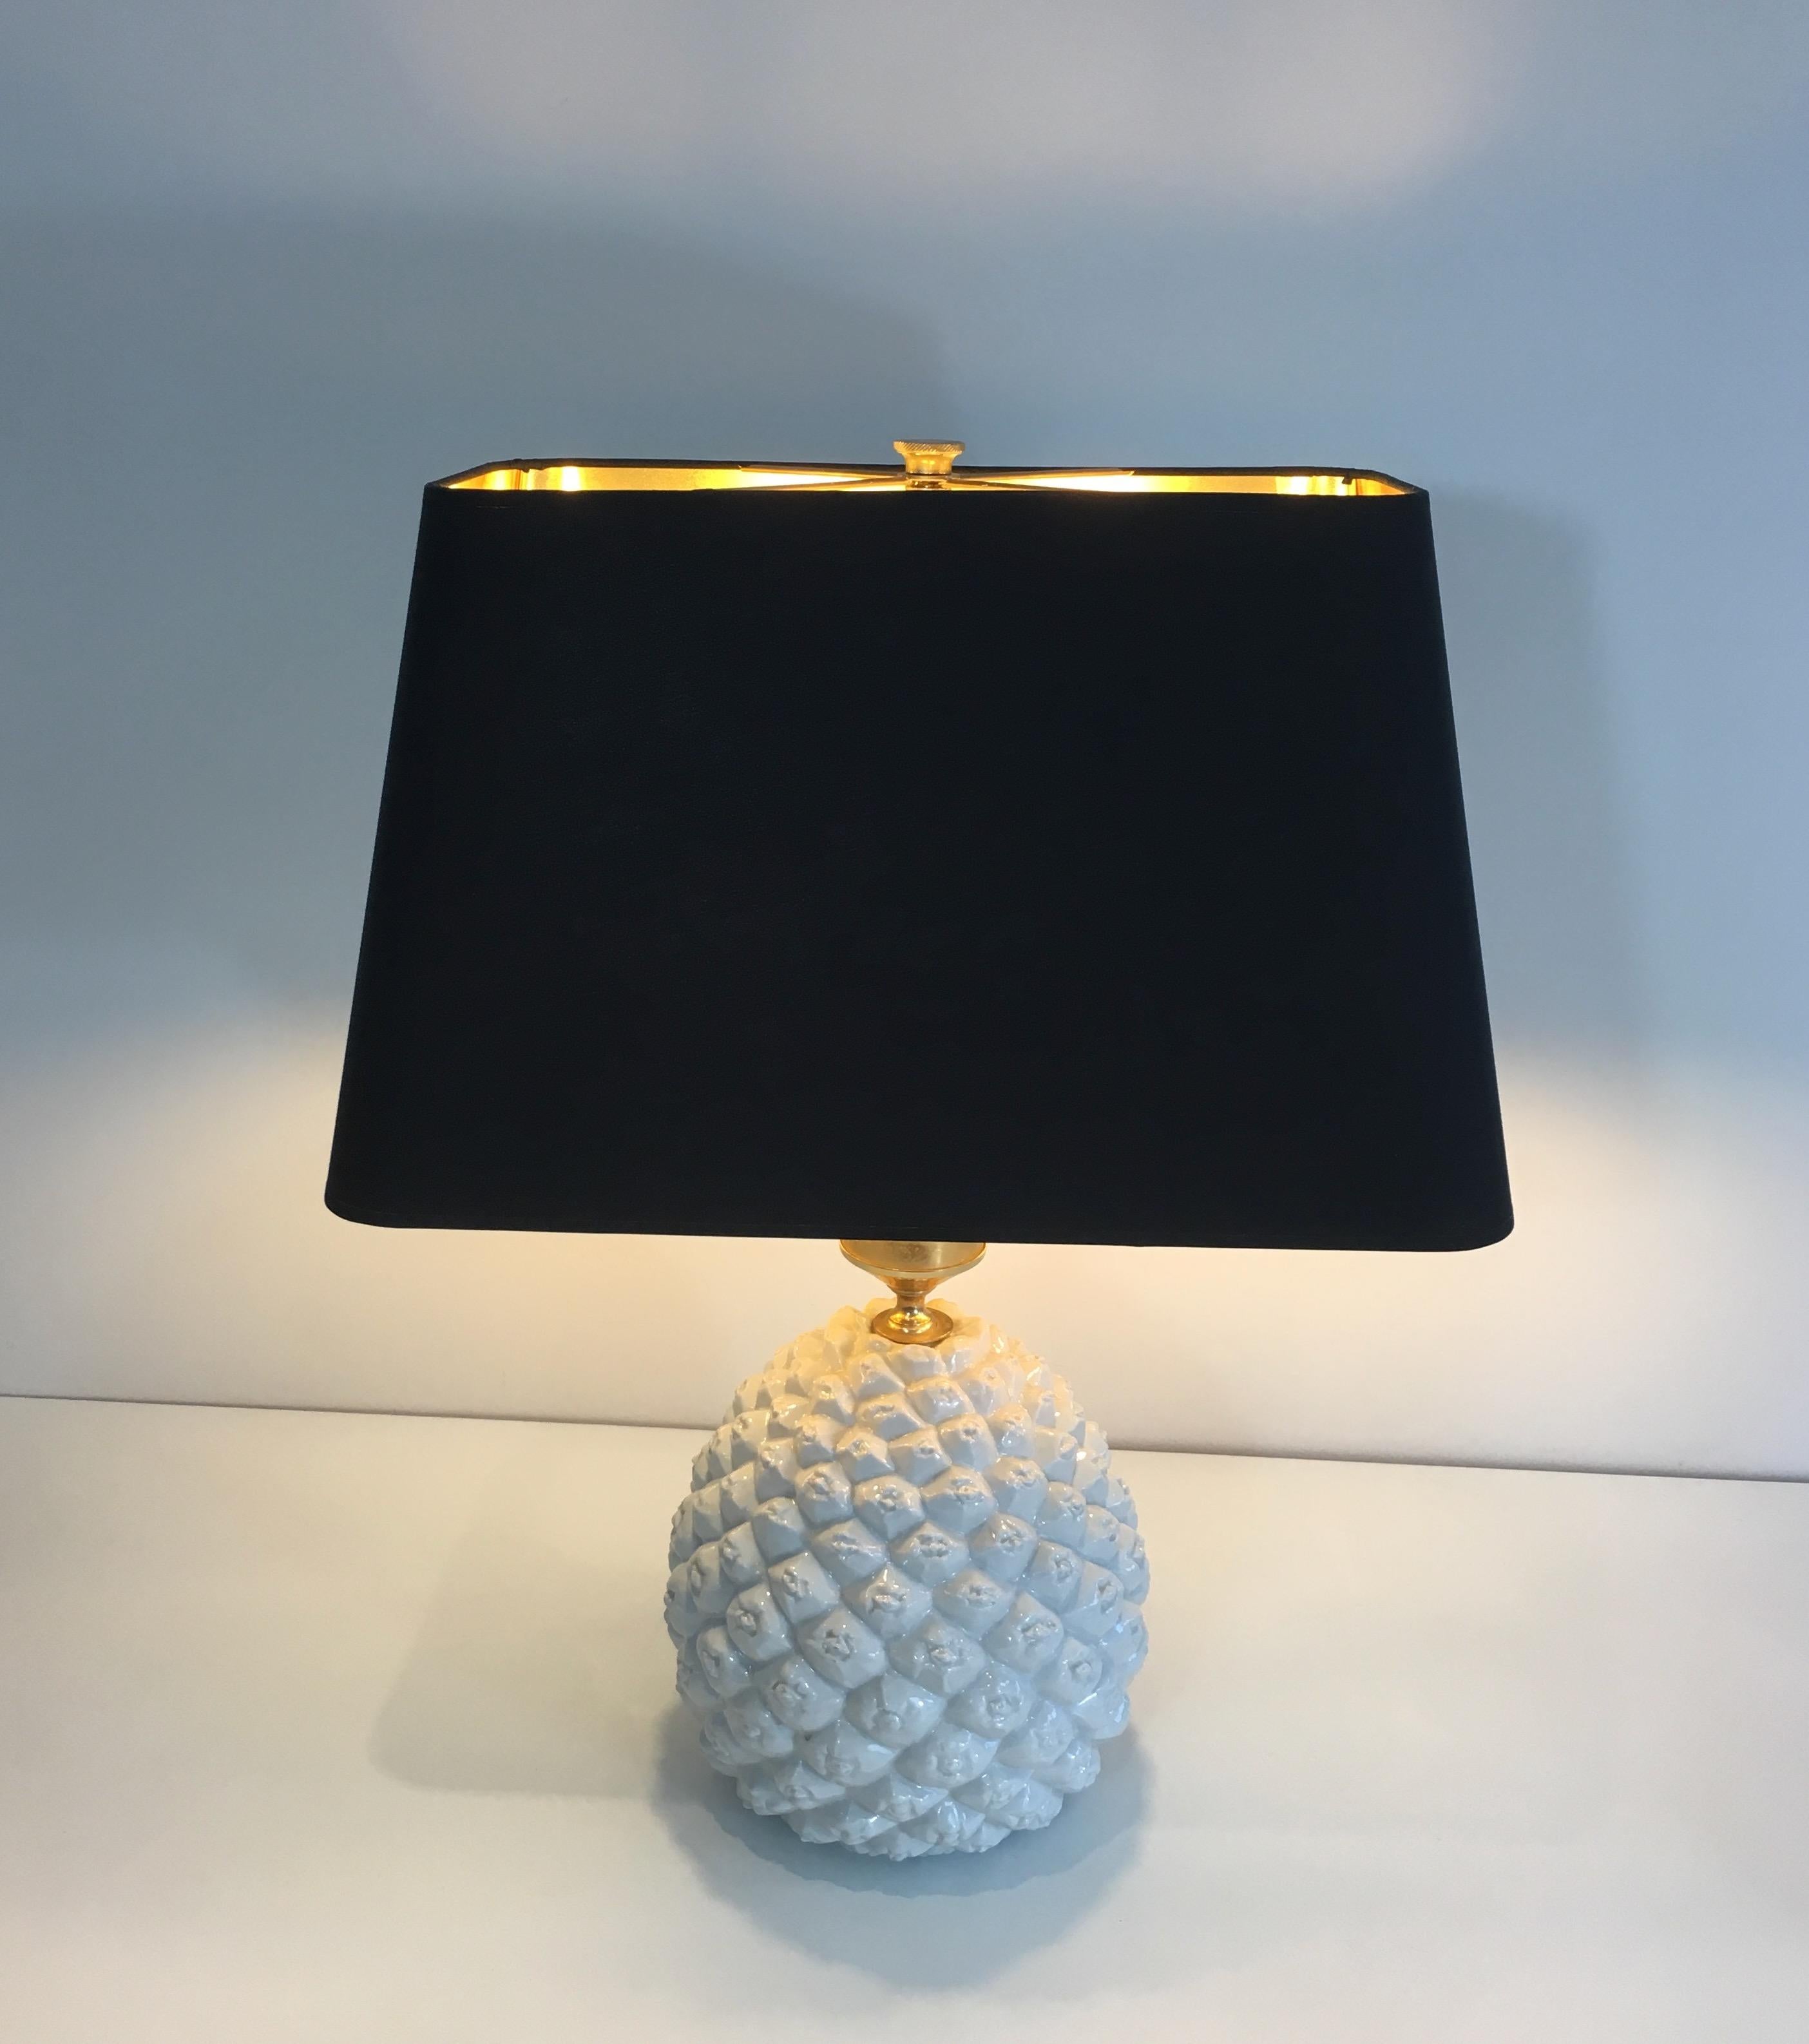 This design pineapple table lamp is made of a white porcelain with a gilt part on top supporting the lights. This is a very decorative piece made in Italy, circa 1970.